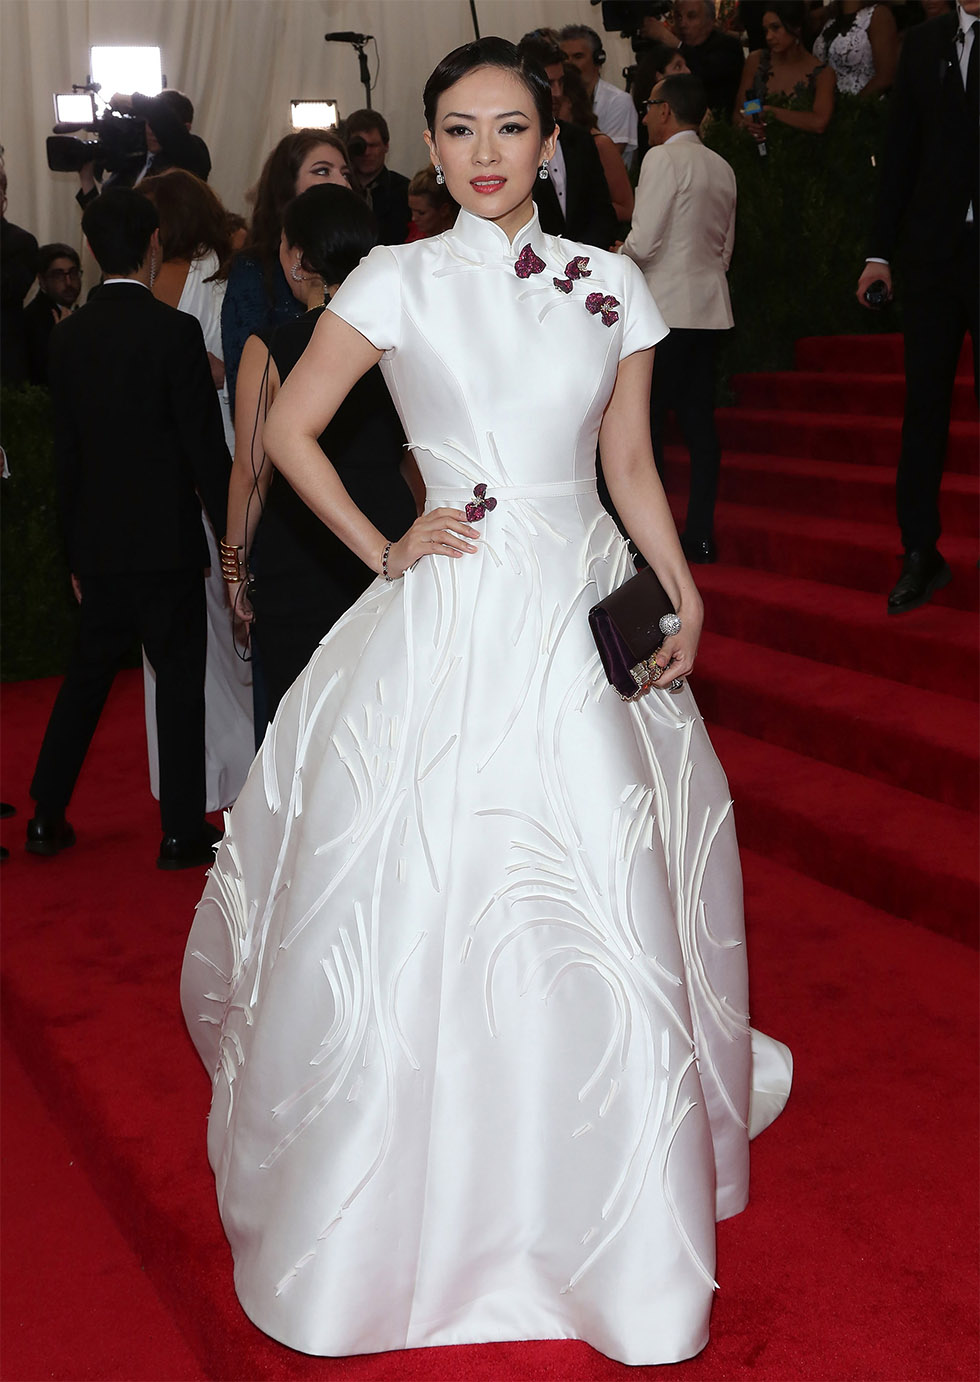 NEW YORK, NY - MAY 04:  Actress Zhang Ziyi attends "China: Through the Looking Glass", the 2015 Costume Institute Gala, at Metropolitan Museum of Art on May 4, 2015 in New York City.  (Photo by Taylor Hill/FilmMagic)